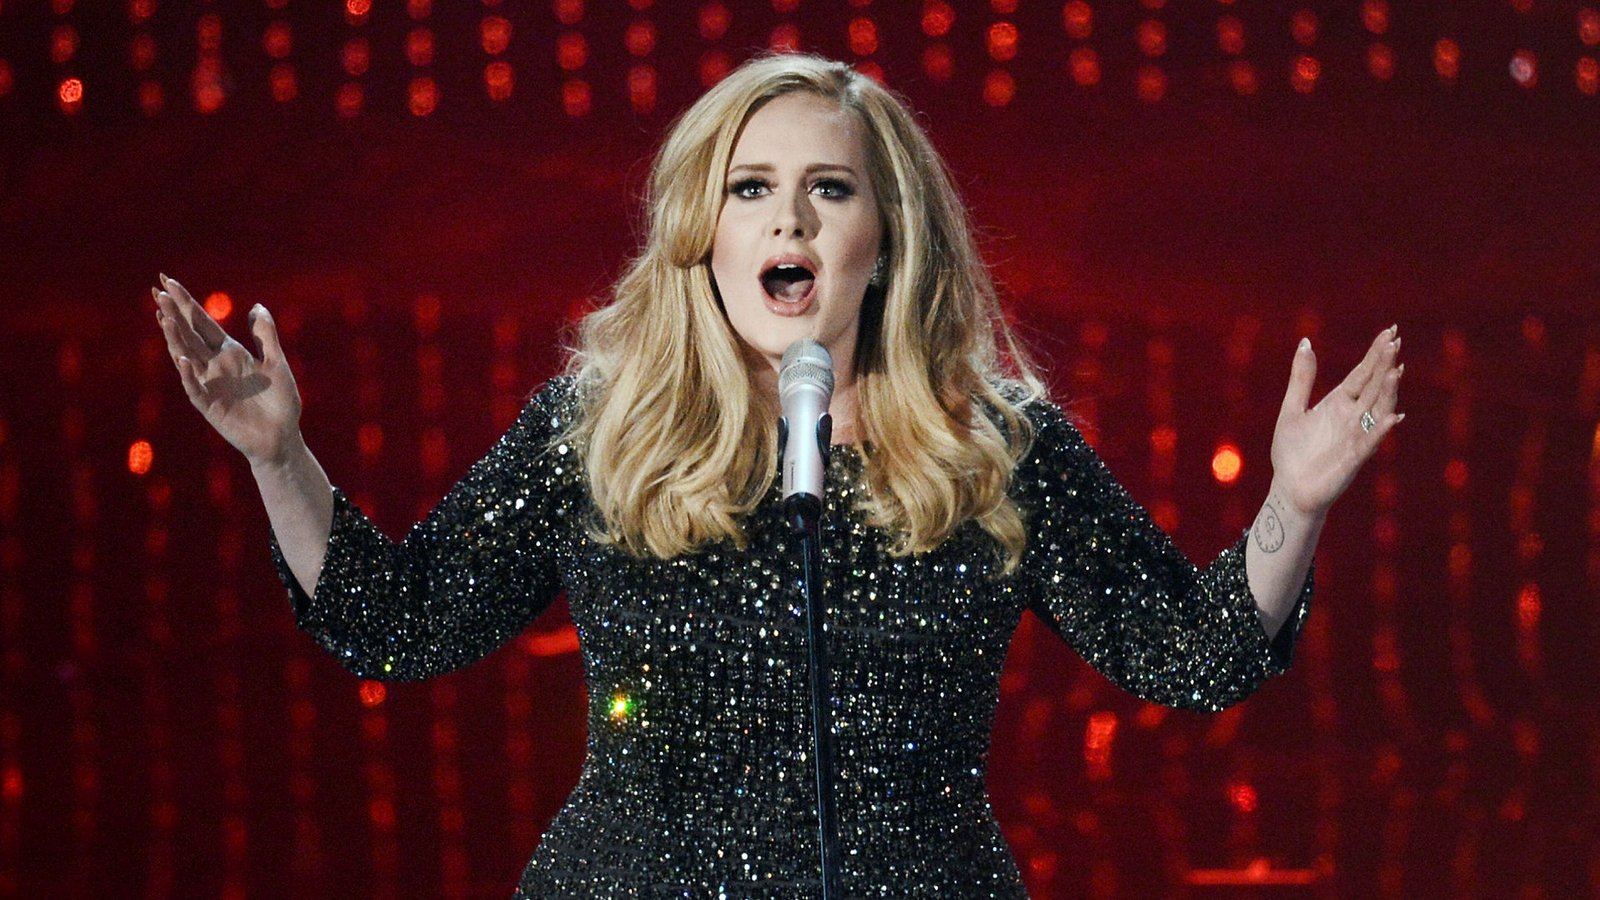 Adele returns to the stage - Announced the new song